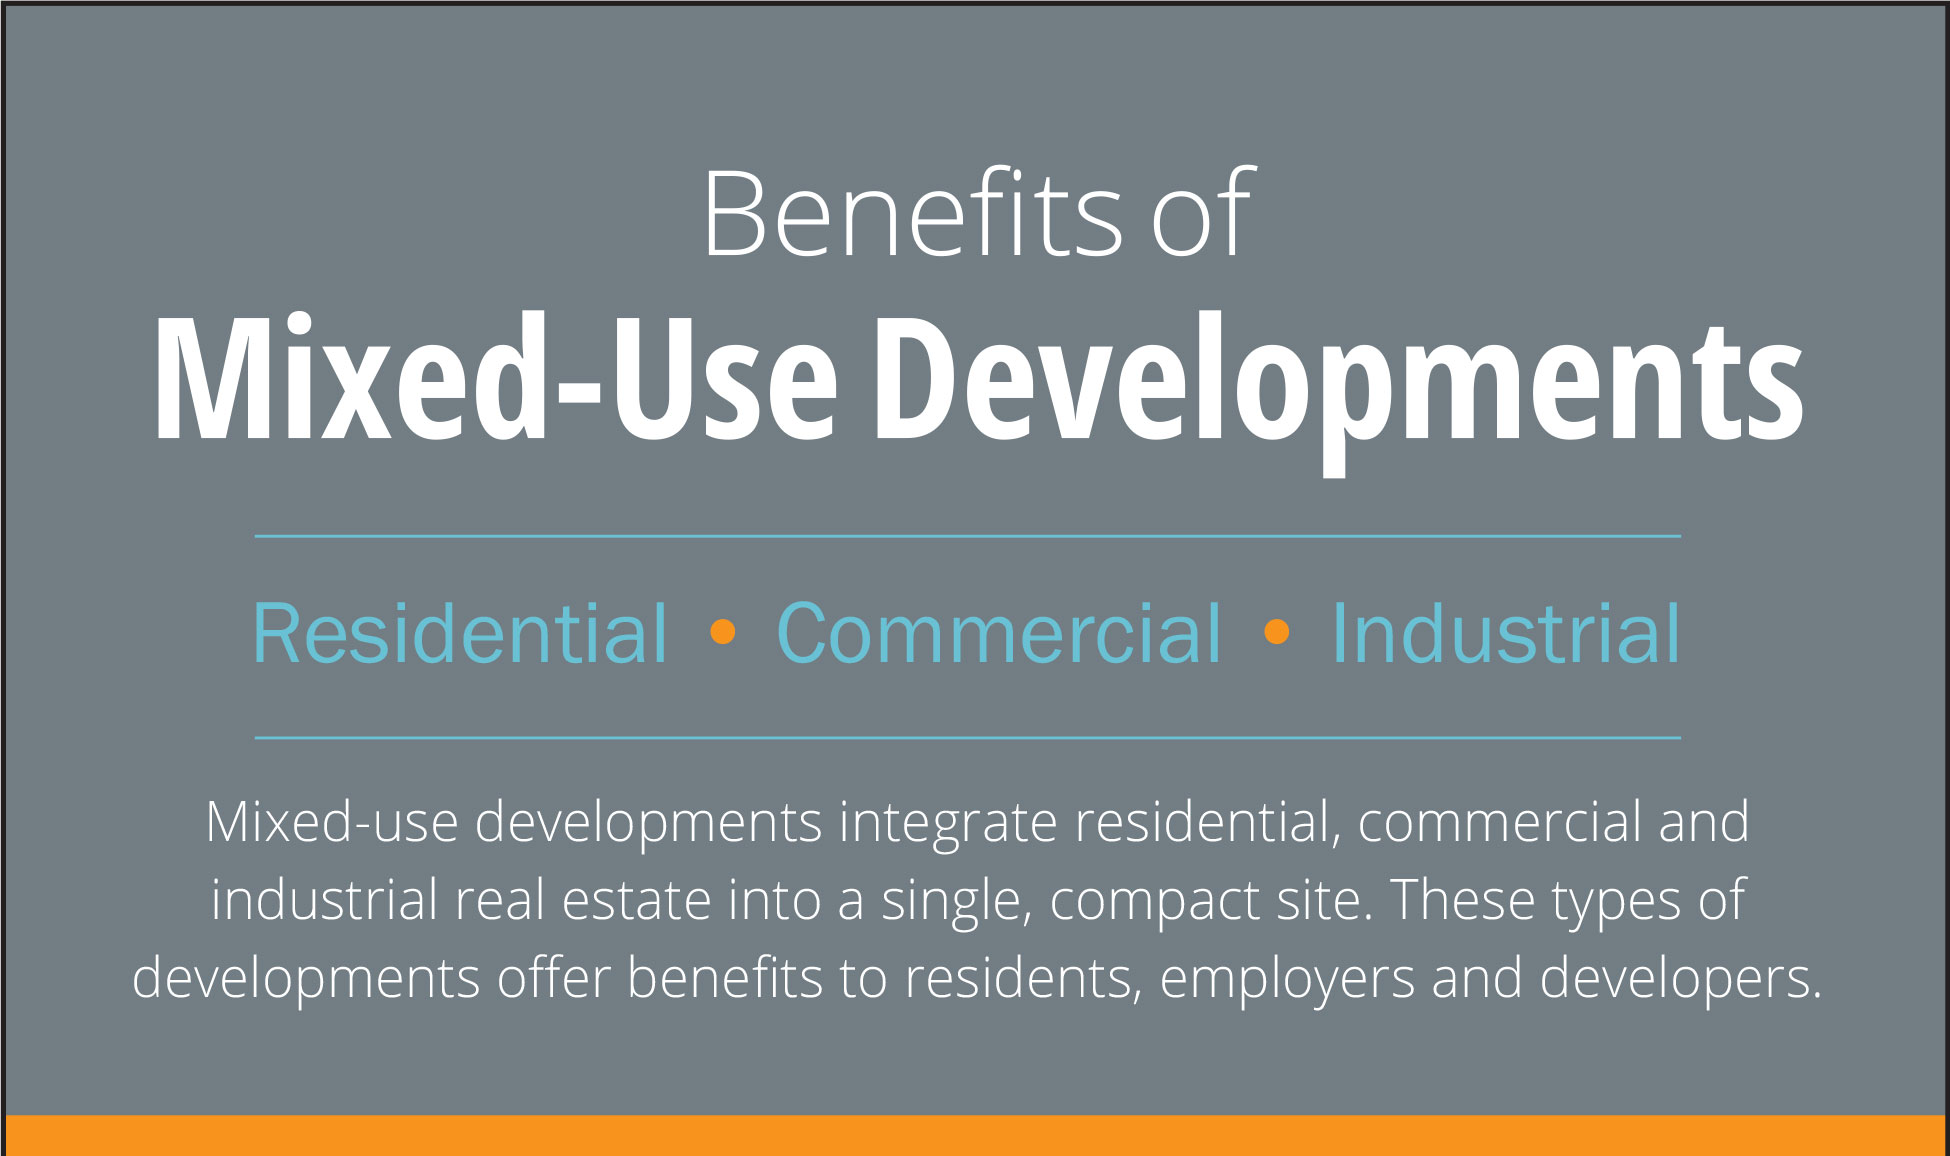 The Benefits of Mixed Use Developments